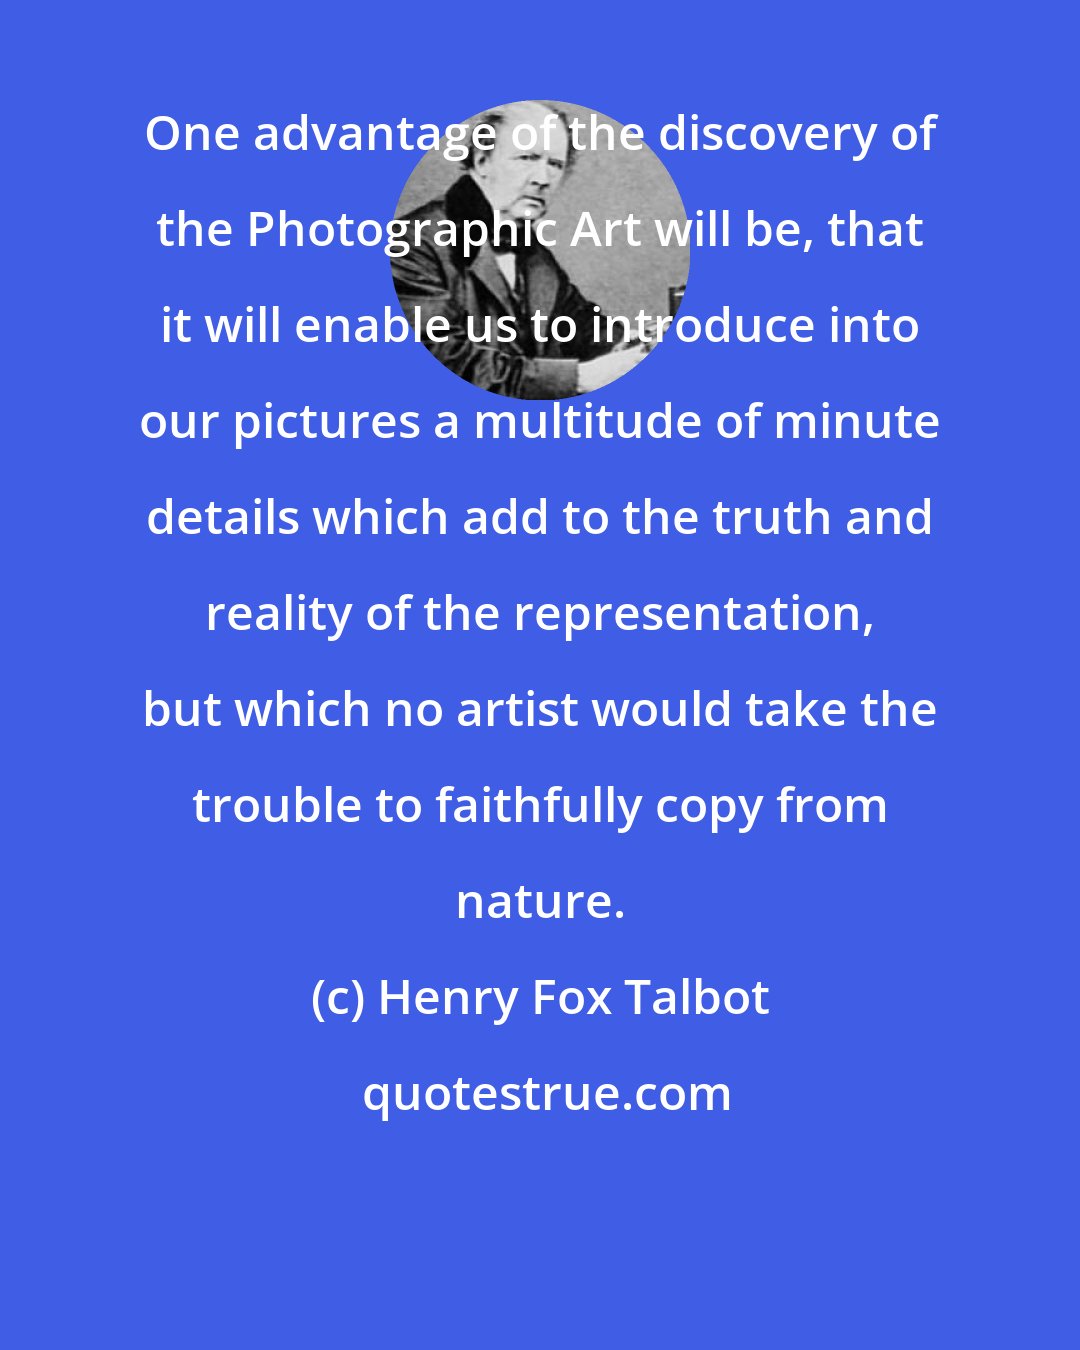 Henry Fox Talbot: One advantage of the discovery of the Photographic Art will be, that it will enable us to introduce into our pictures a multitude of minute details which add to the truth and reality of the representation, but which no artist would take the trouble to faithfully copy from nature.